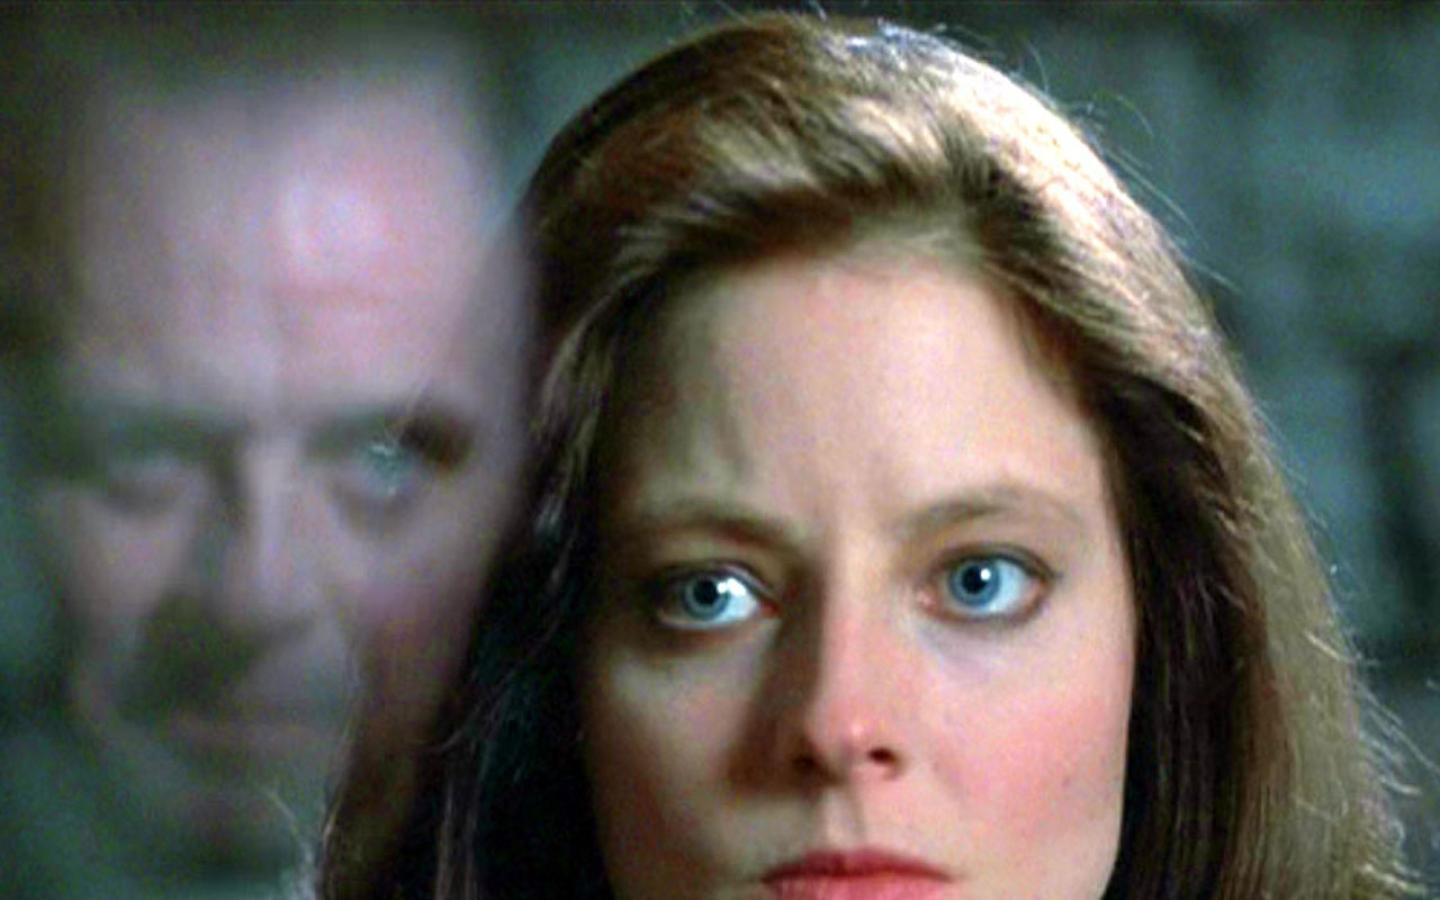 The Silence Of The Lambs Wallpaper #2 1440 x 900 